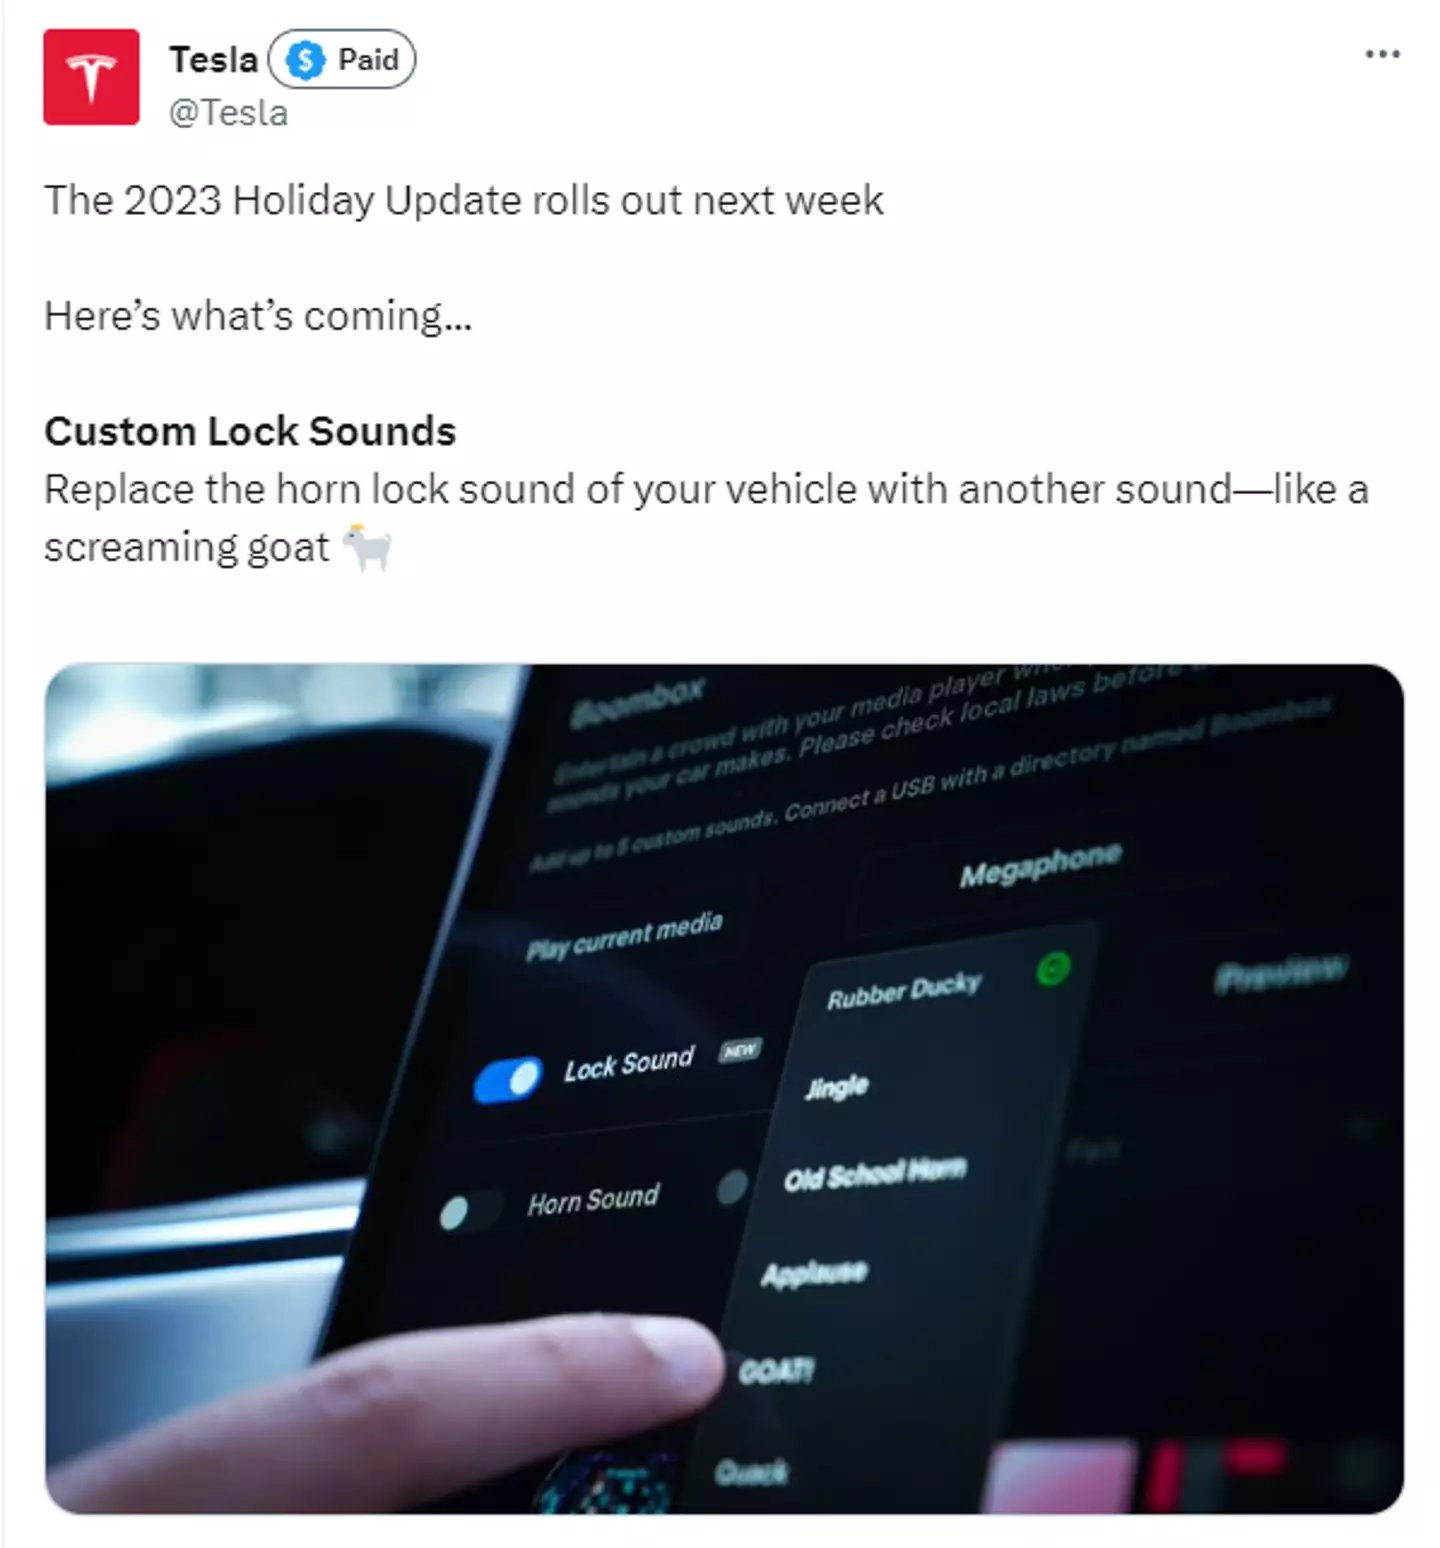 Tesla has announced its 2023 Holiday Updates to be rolled out next week.